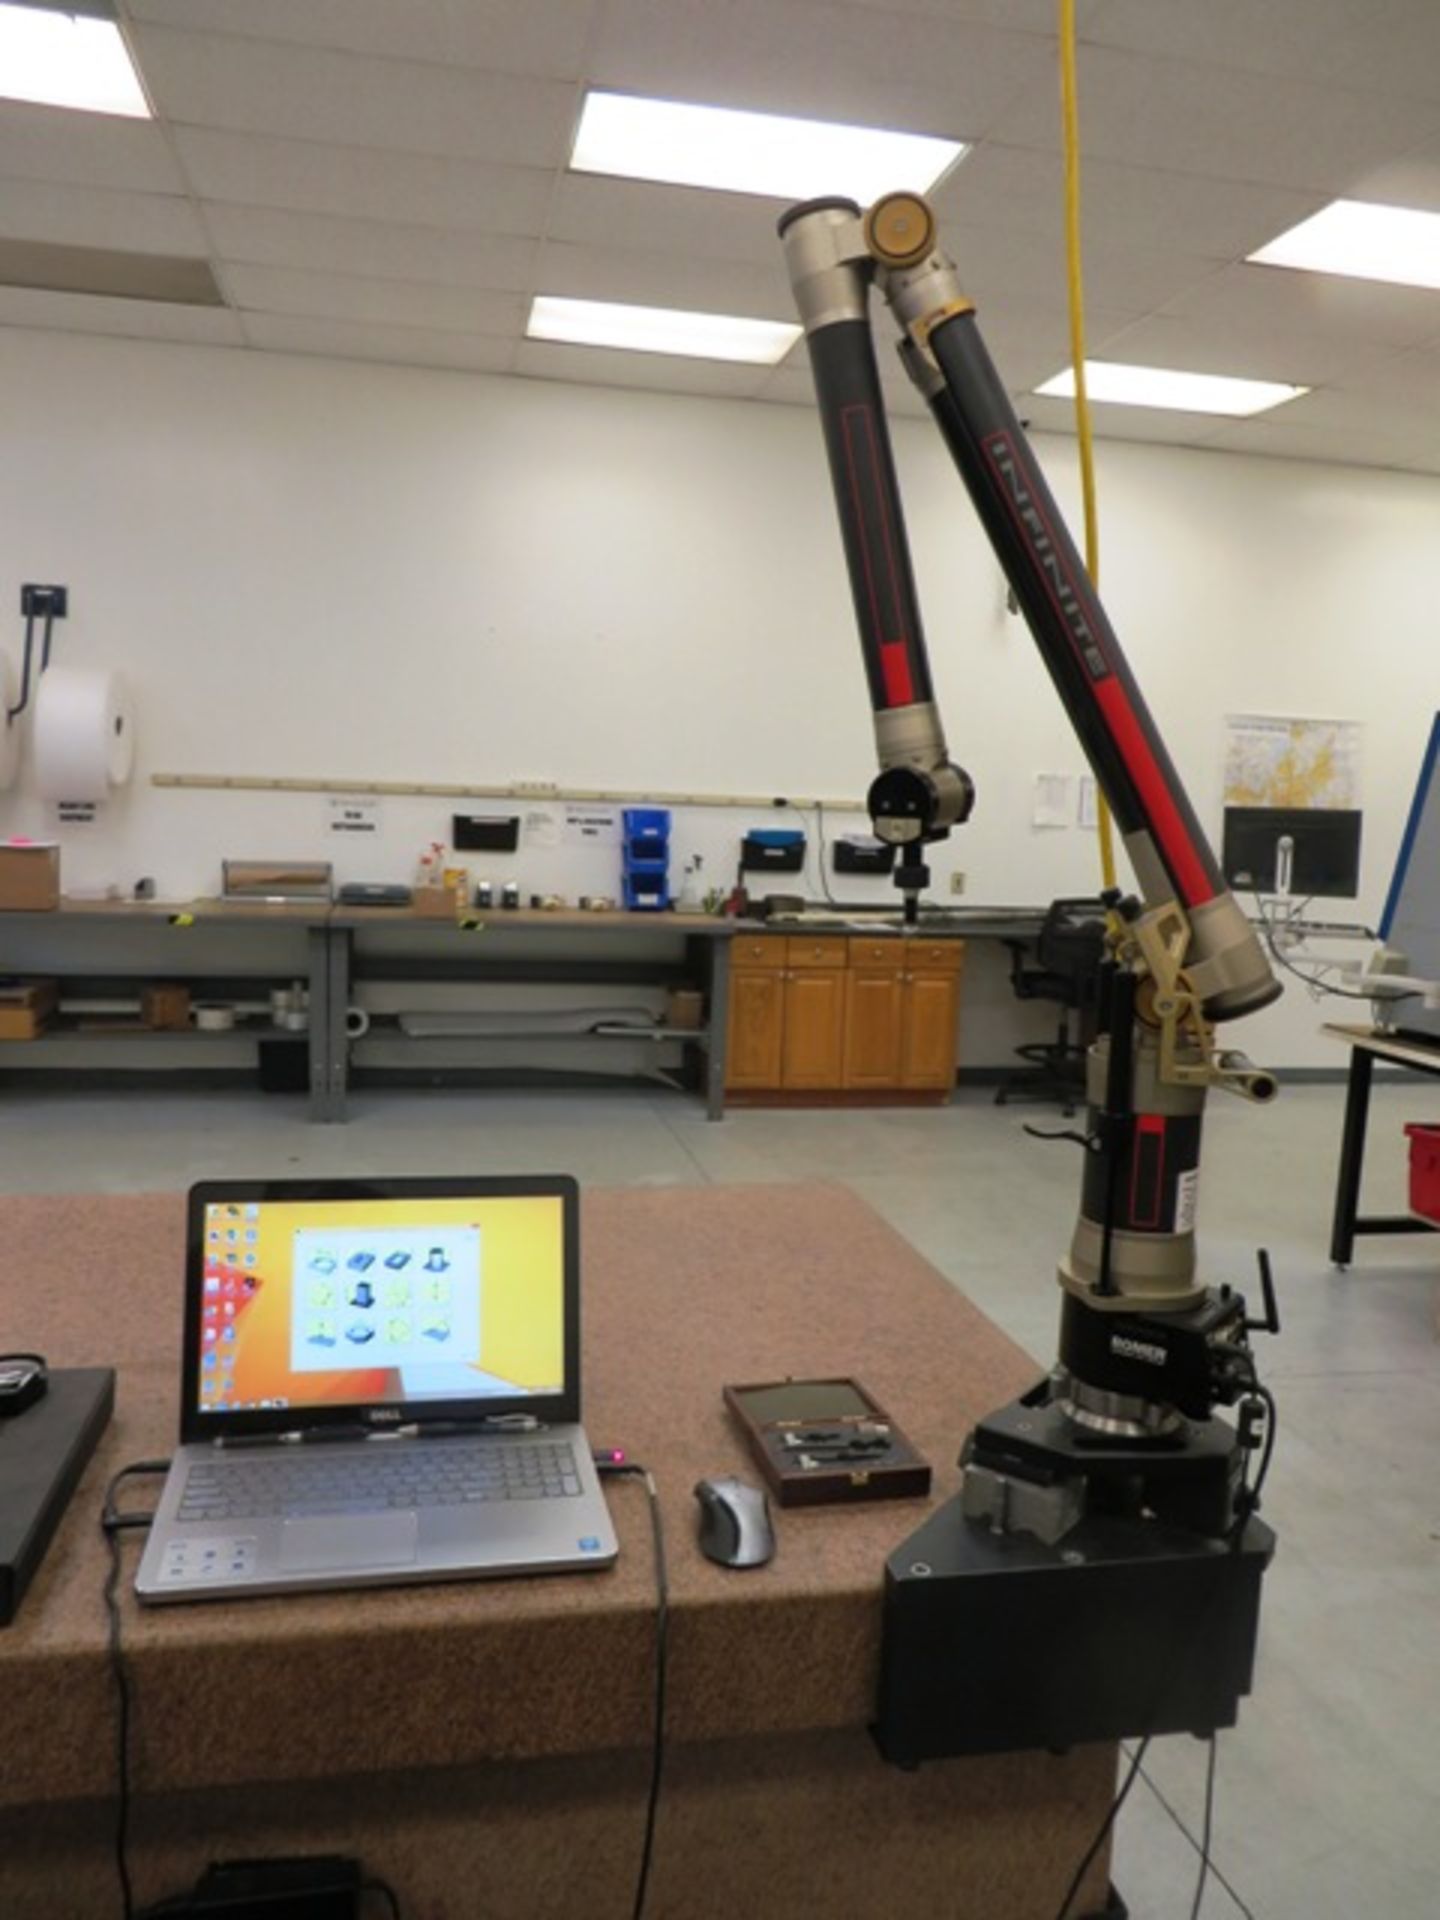 Romer Model 54 Infinite Portable Coordinate Measuring Machine with PC DMIS Software, Windows RDS 7.